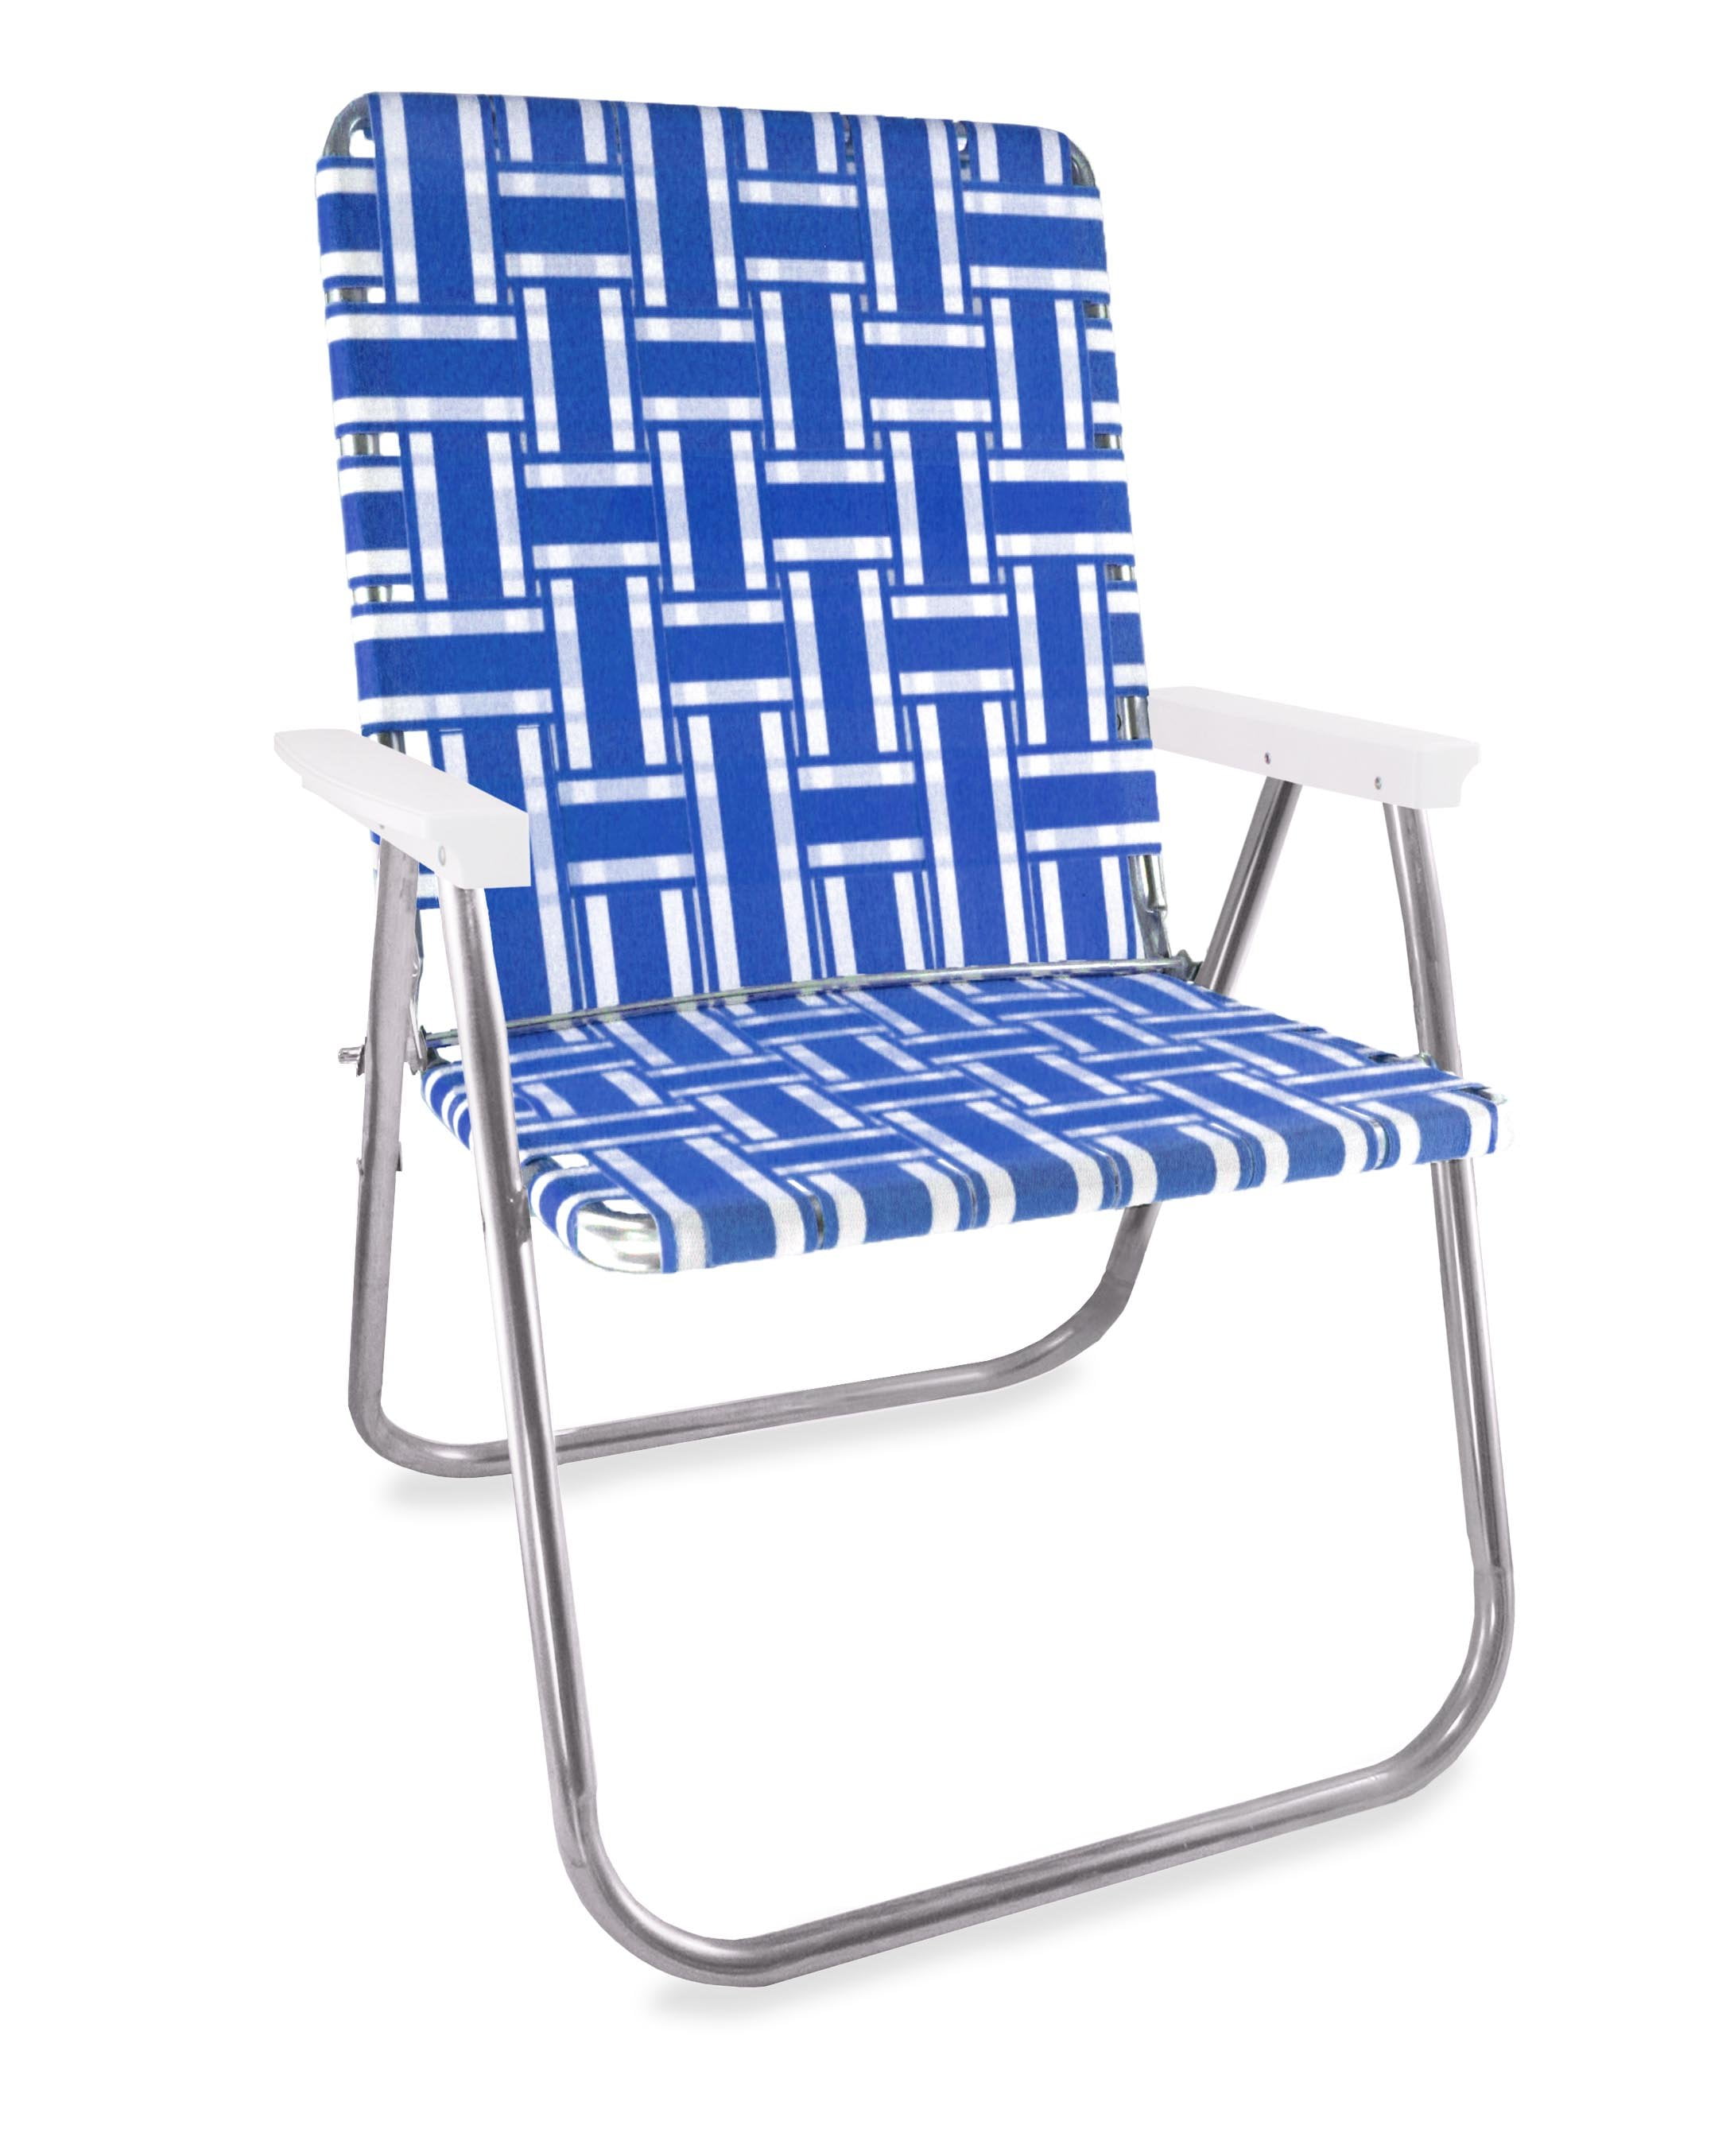 Lawn Chair USA Webbing Chair (Magnum, Blue and White with White Arms